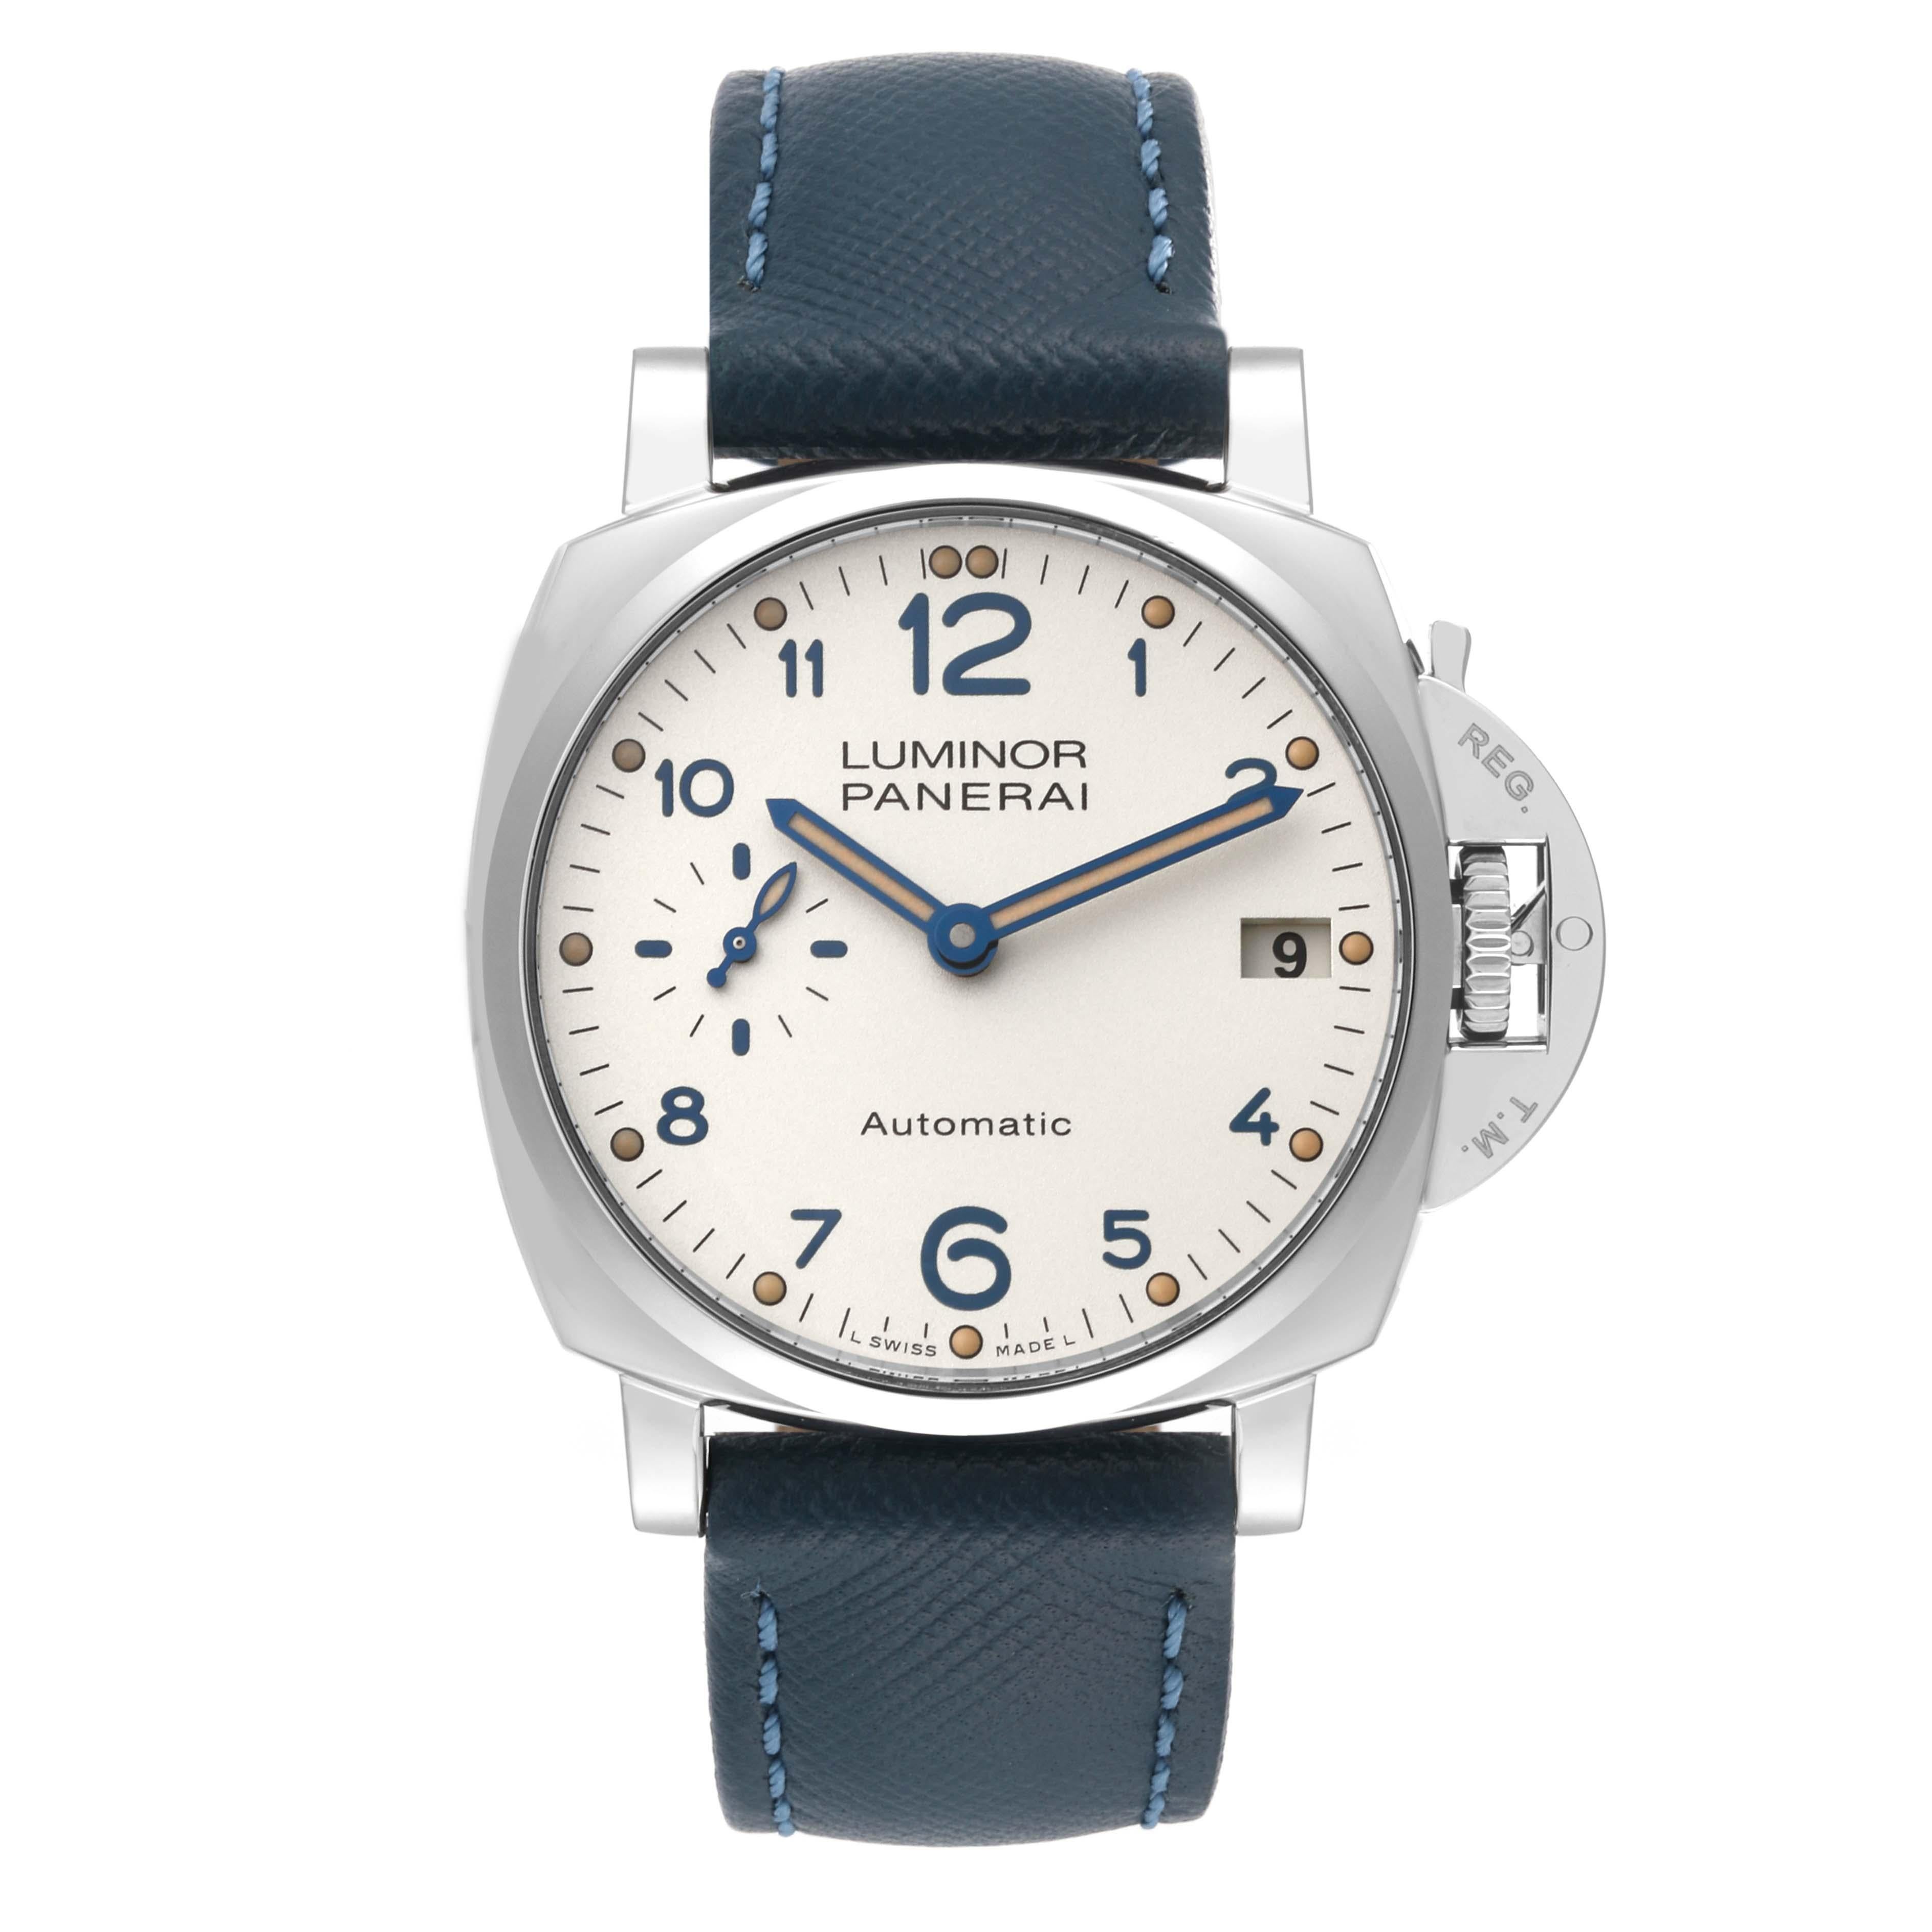 Panerai Luminor Due 38 mm Steel Ivory Dial Mens Watch PAM00903 Box Papers. Automatic self-winding movement. Two part cushion shaped steel case 38.0 mm in diameter. Panerai patented crown protector. Stainless steel sloped polished bezel. Scratch